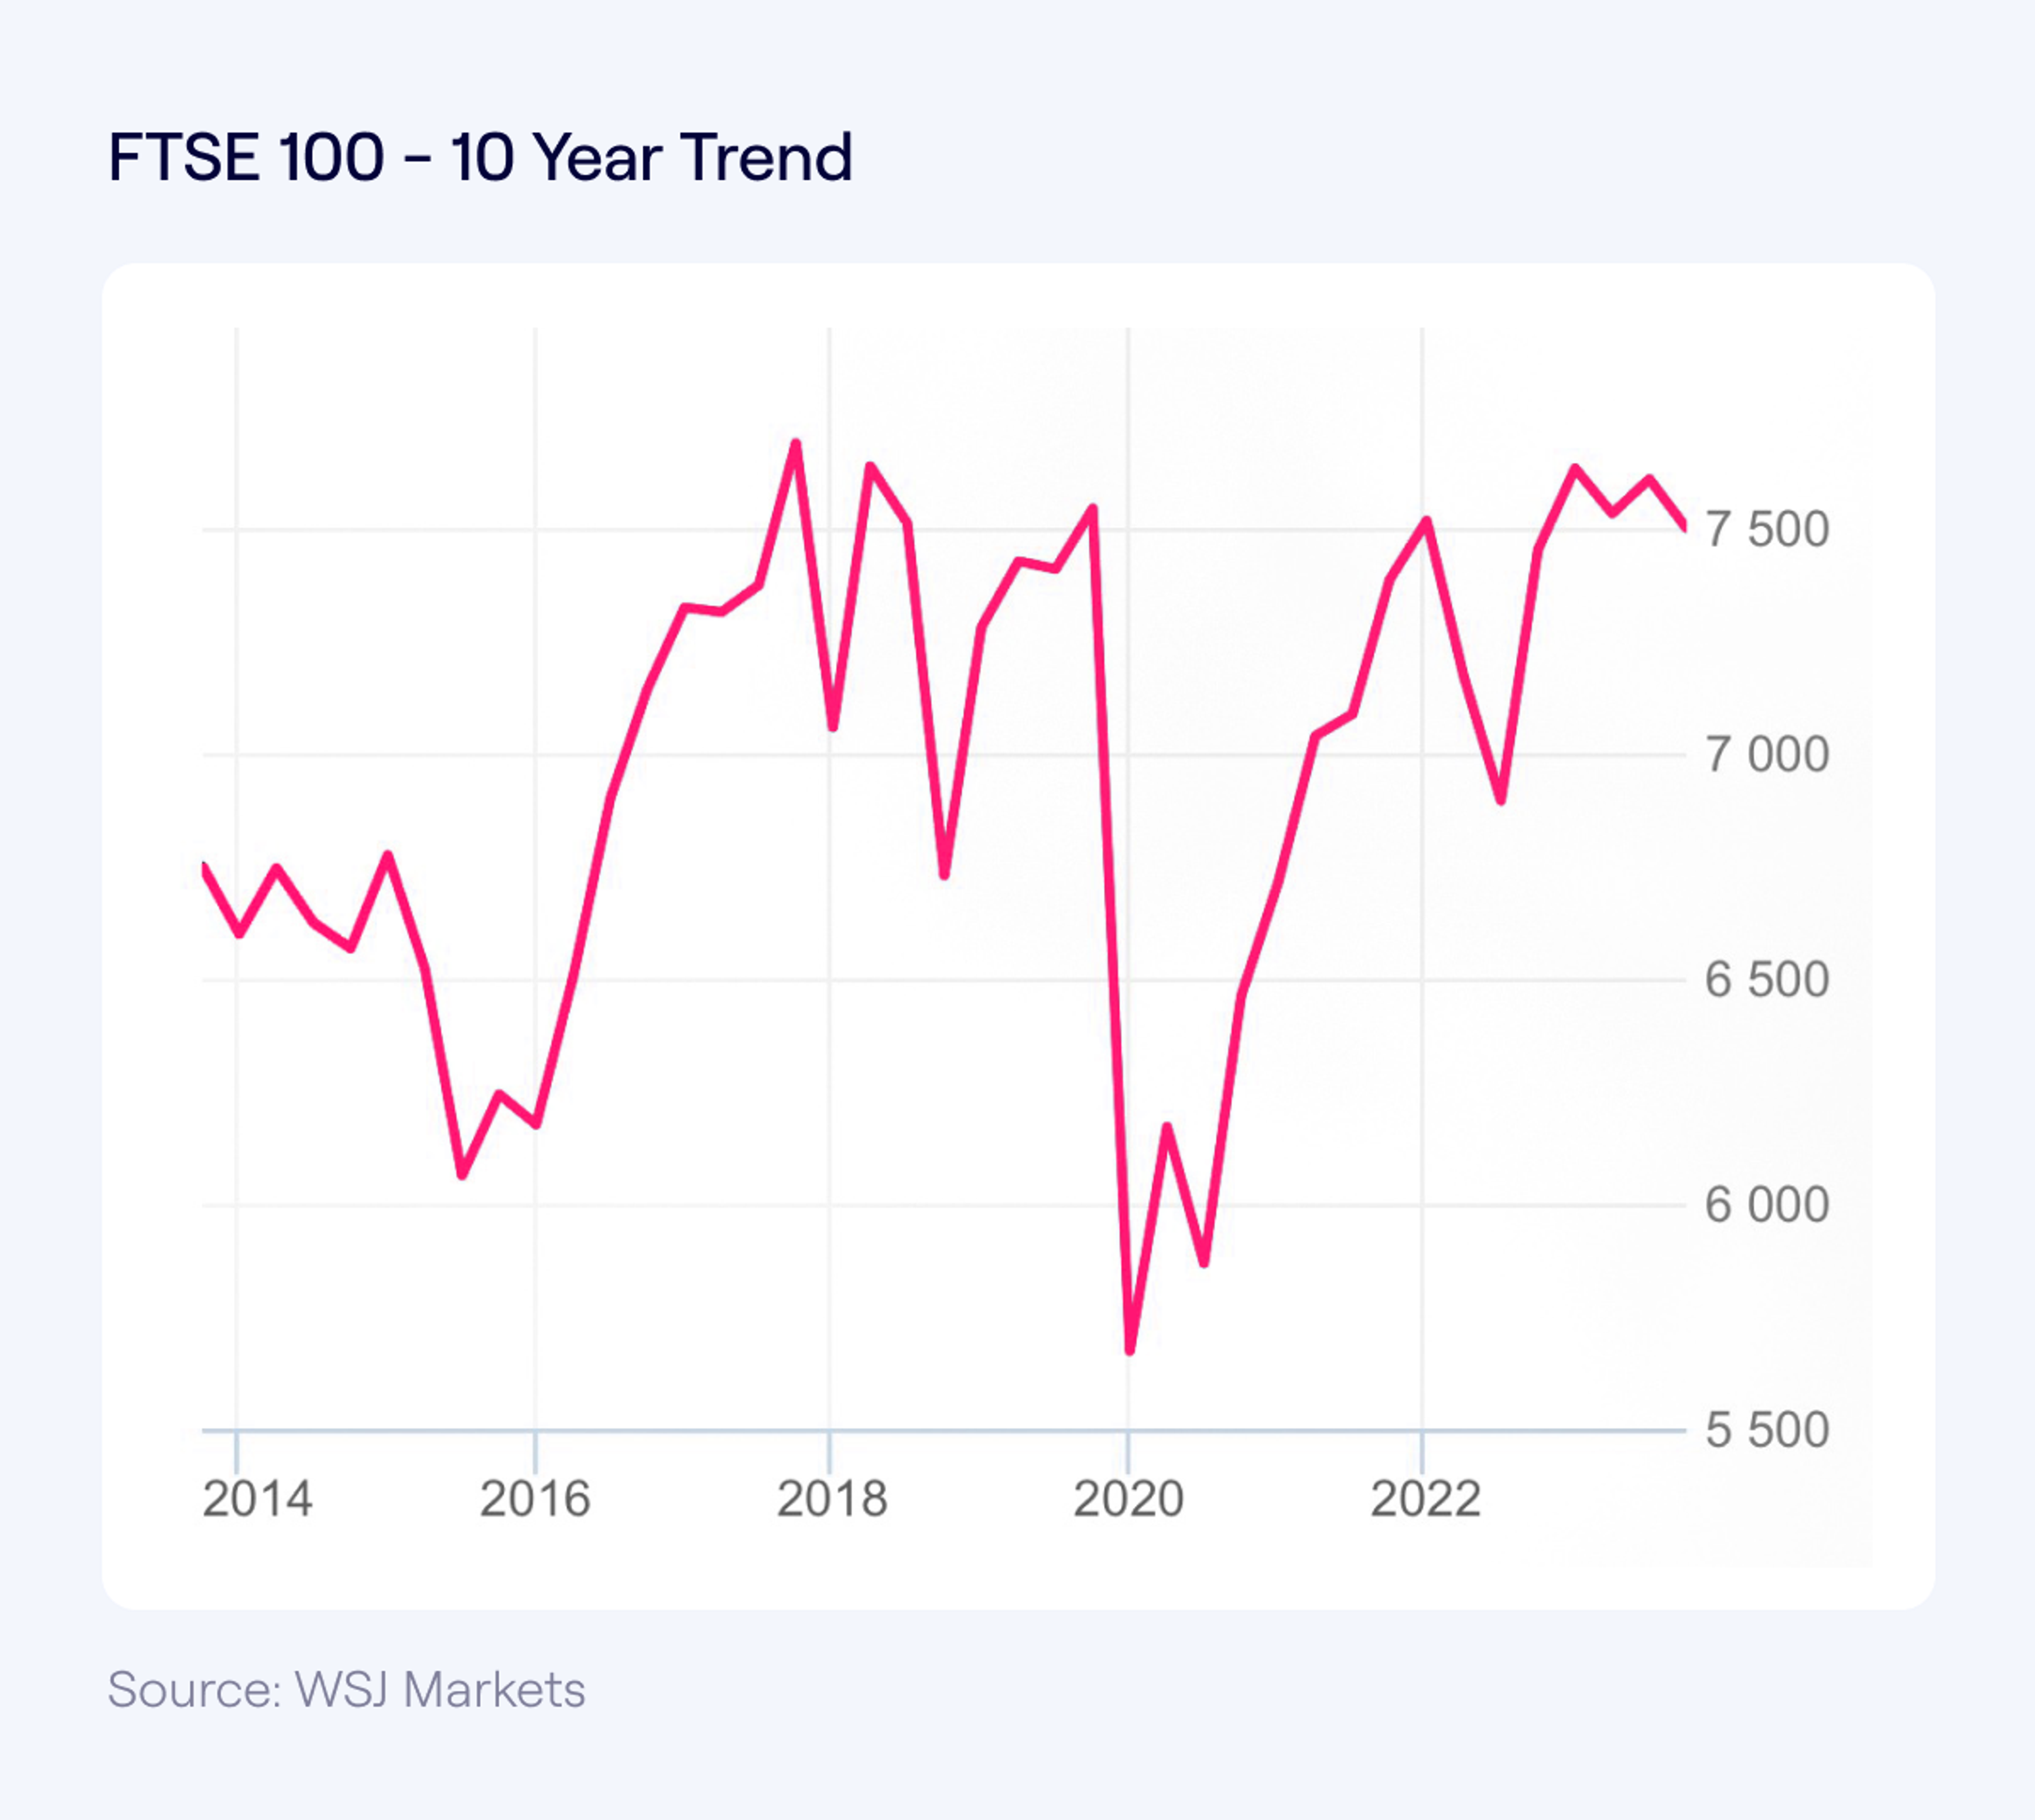 A line chart showing FTSE 100 performance over the last 10 years